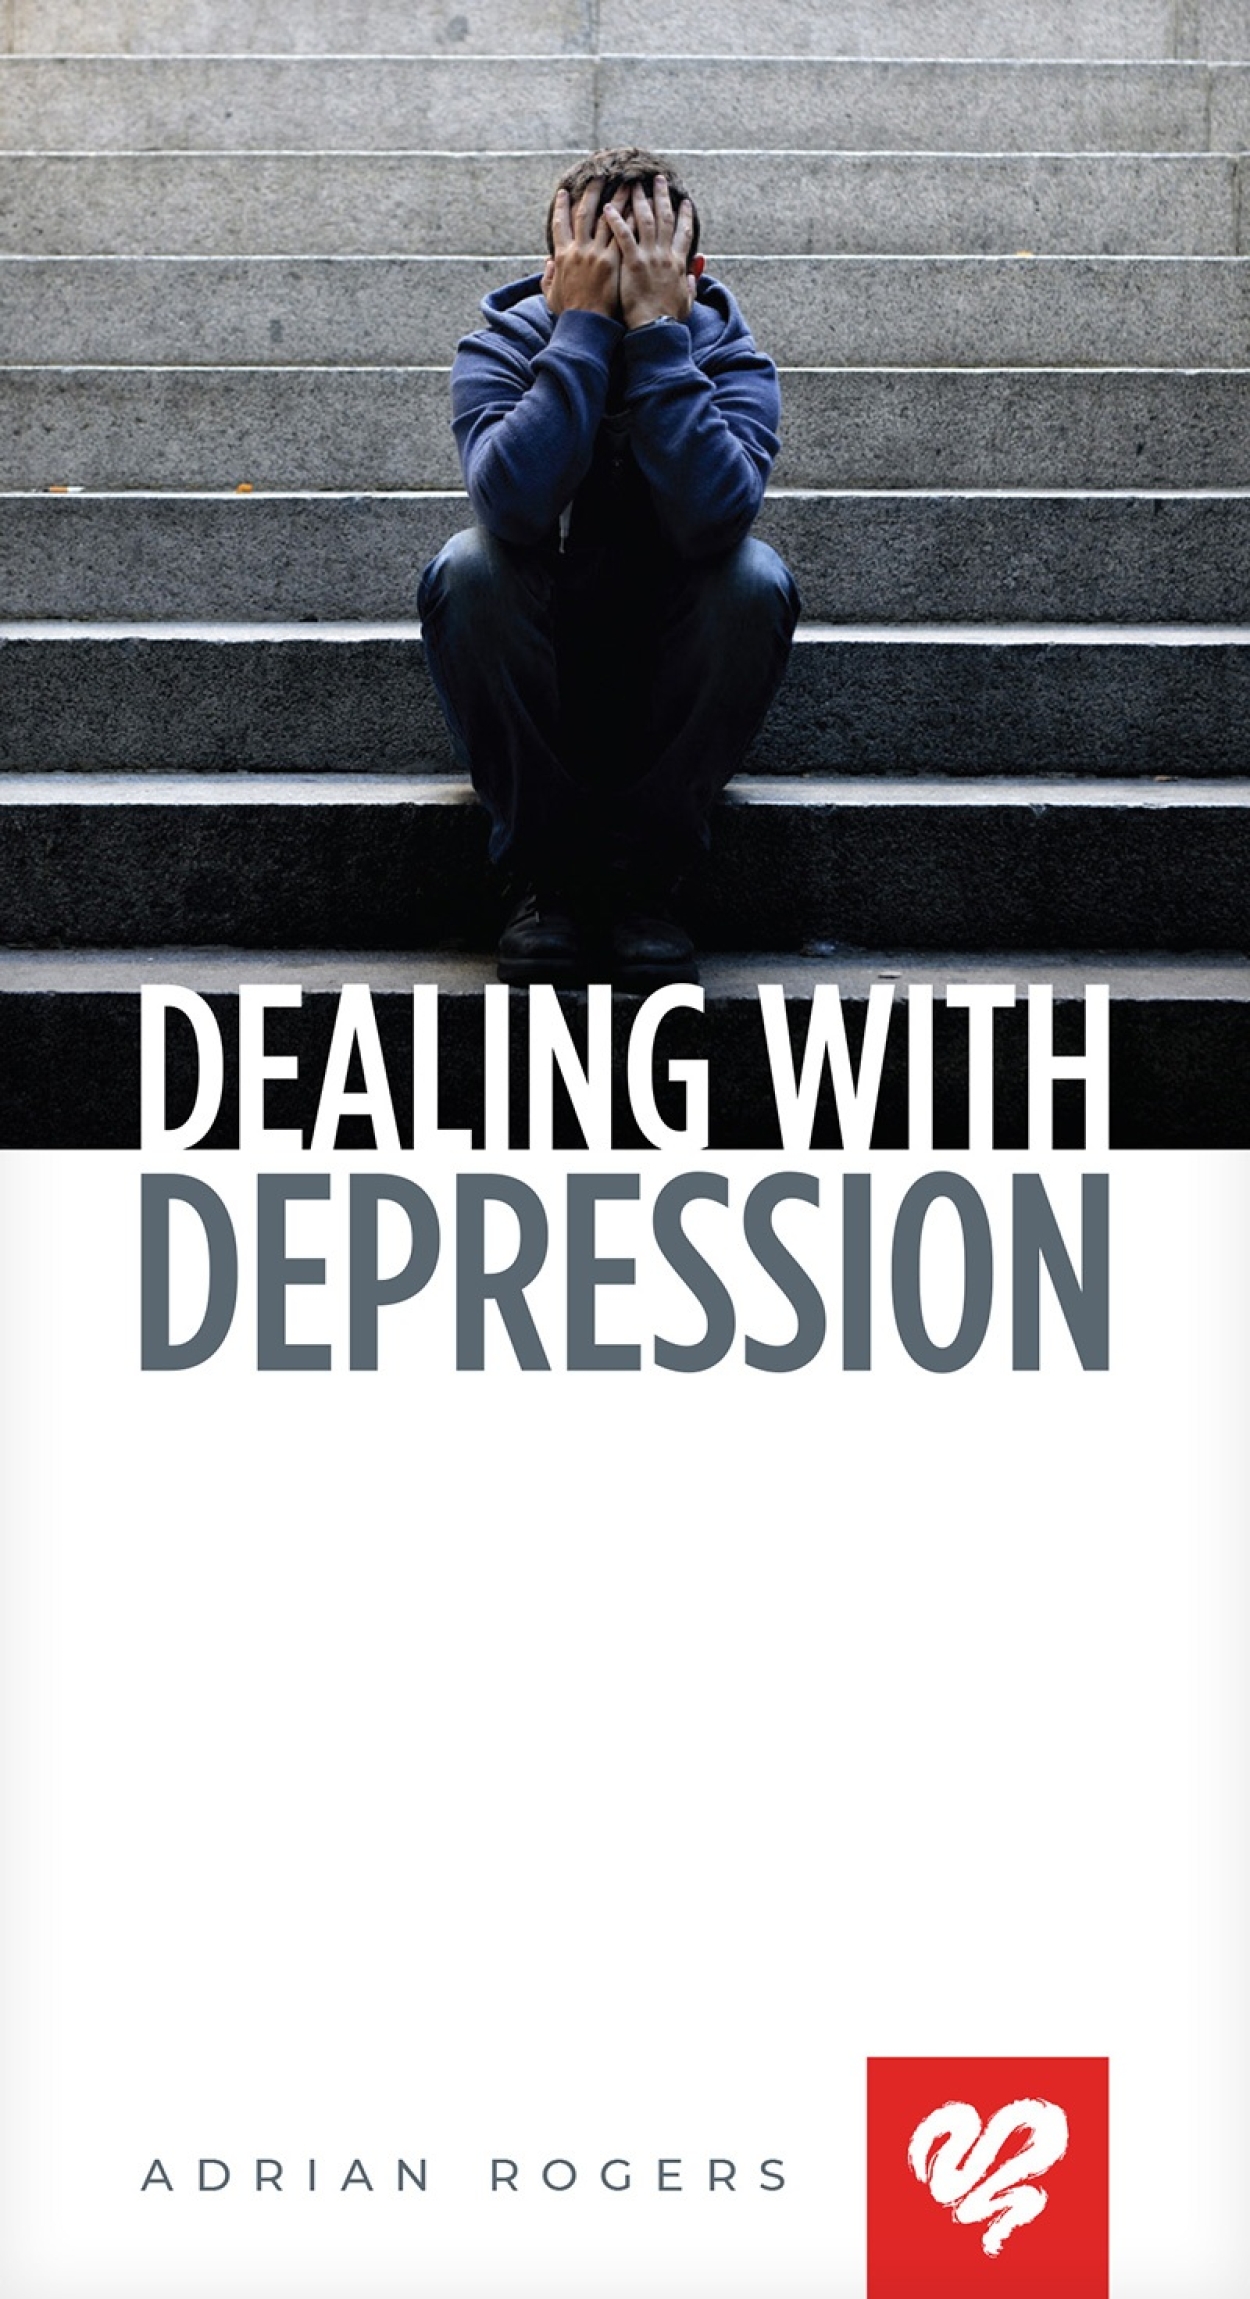 Dealing With Depression Booklet K124